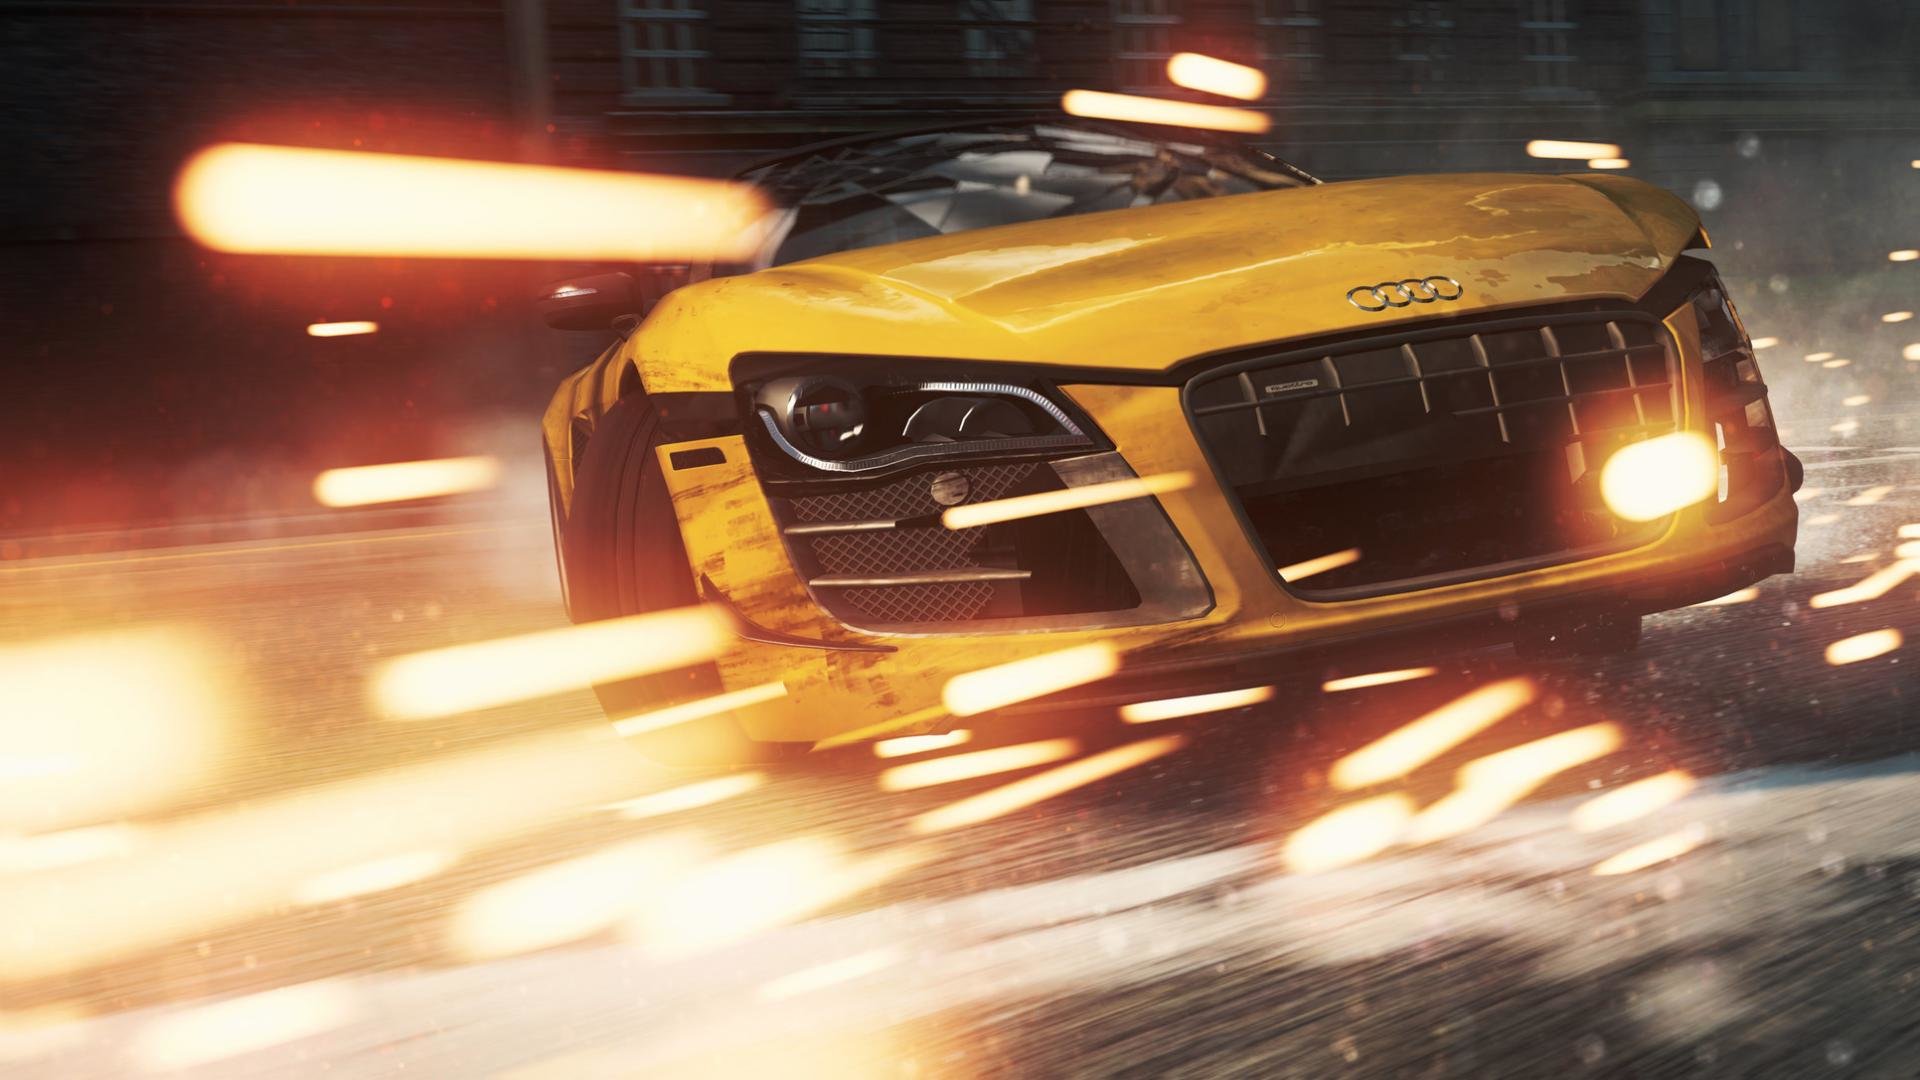 Awesome Need For Speed: Most Wanted free wallpaper ID:137097 for full hd 1080p computer